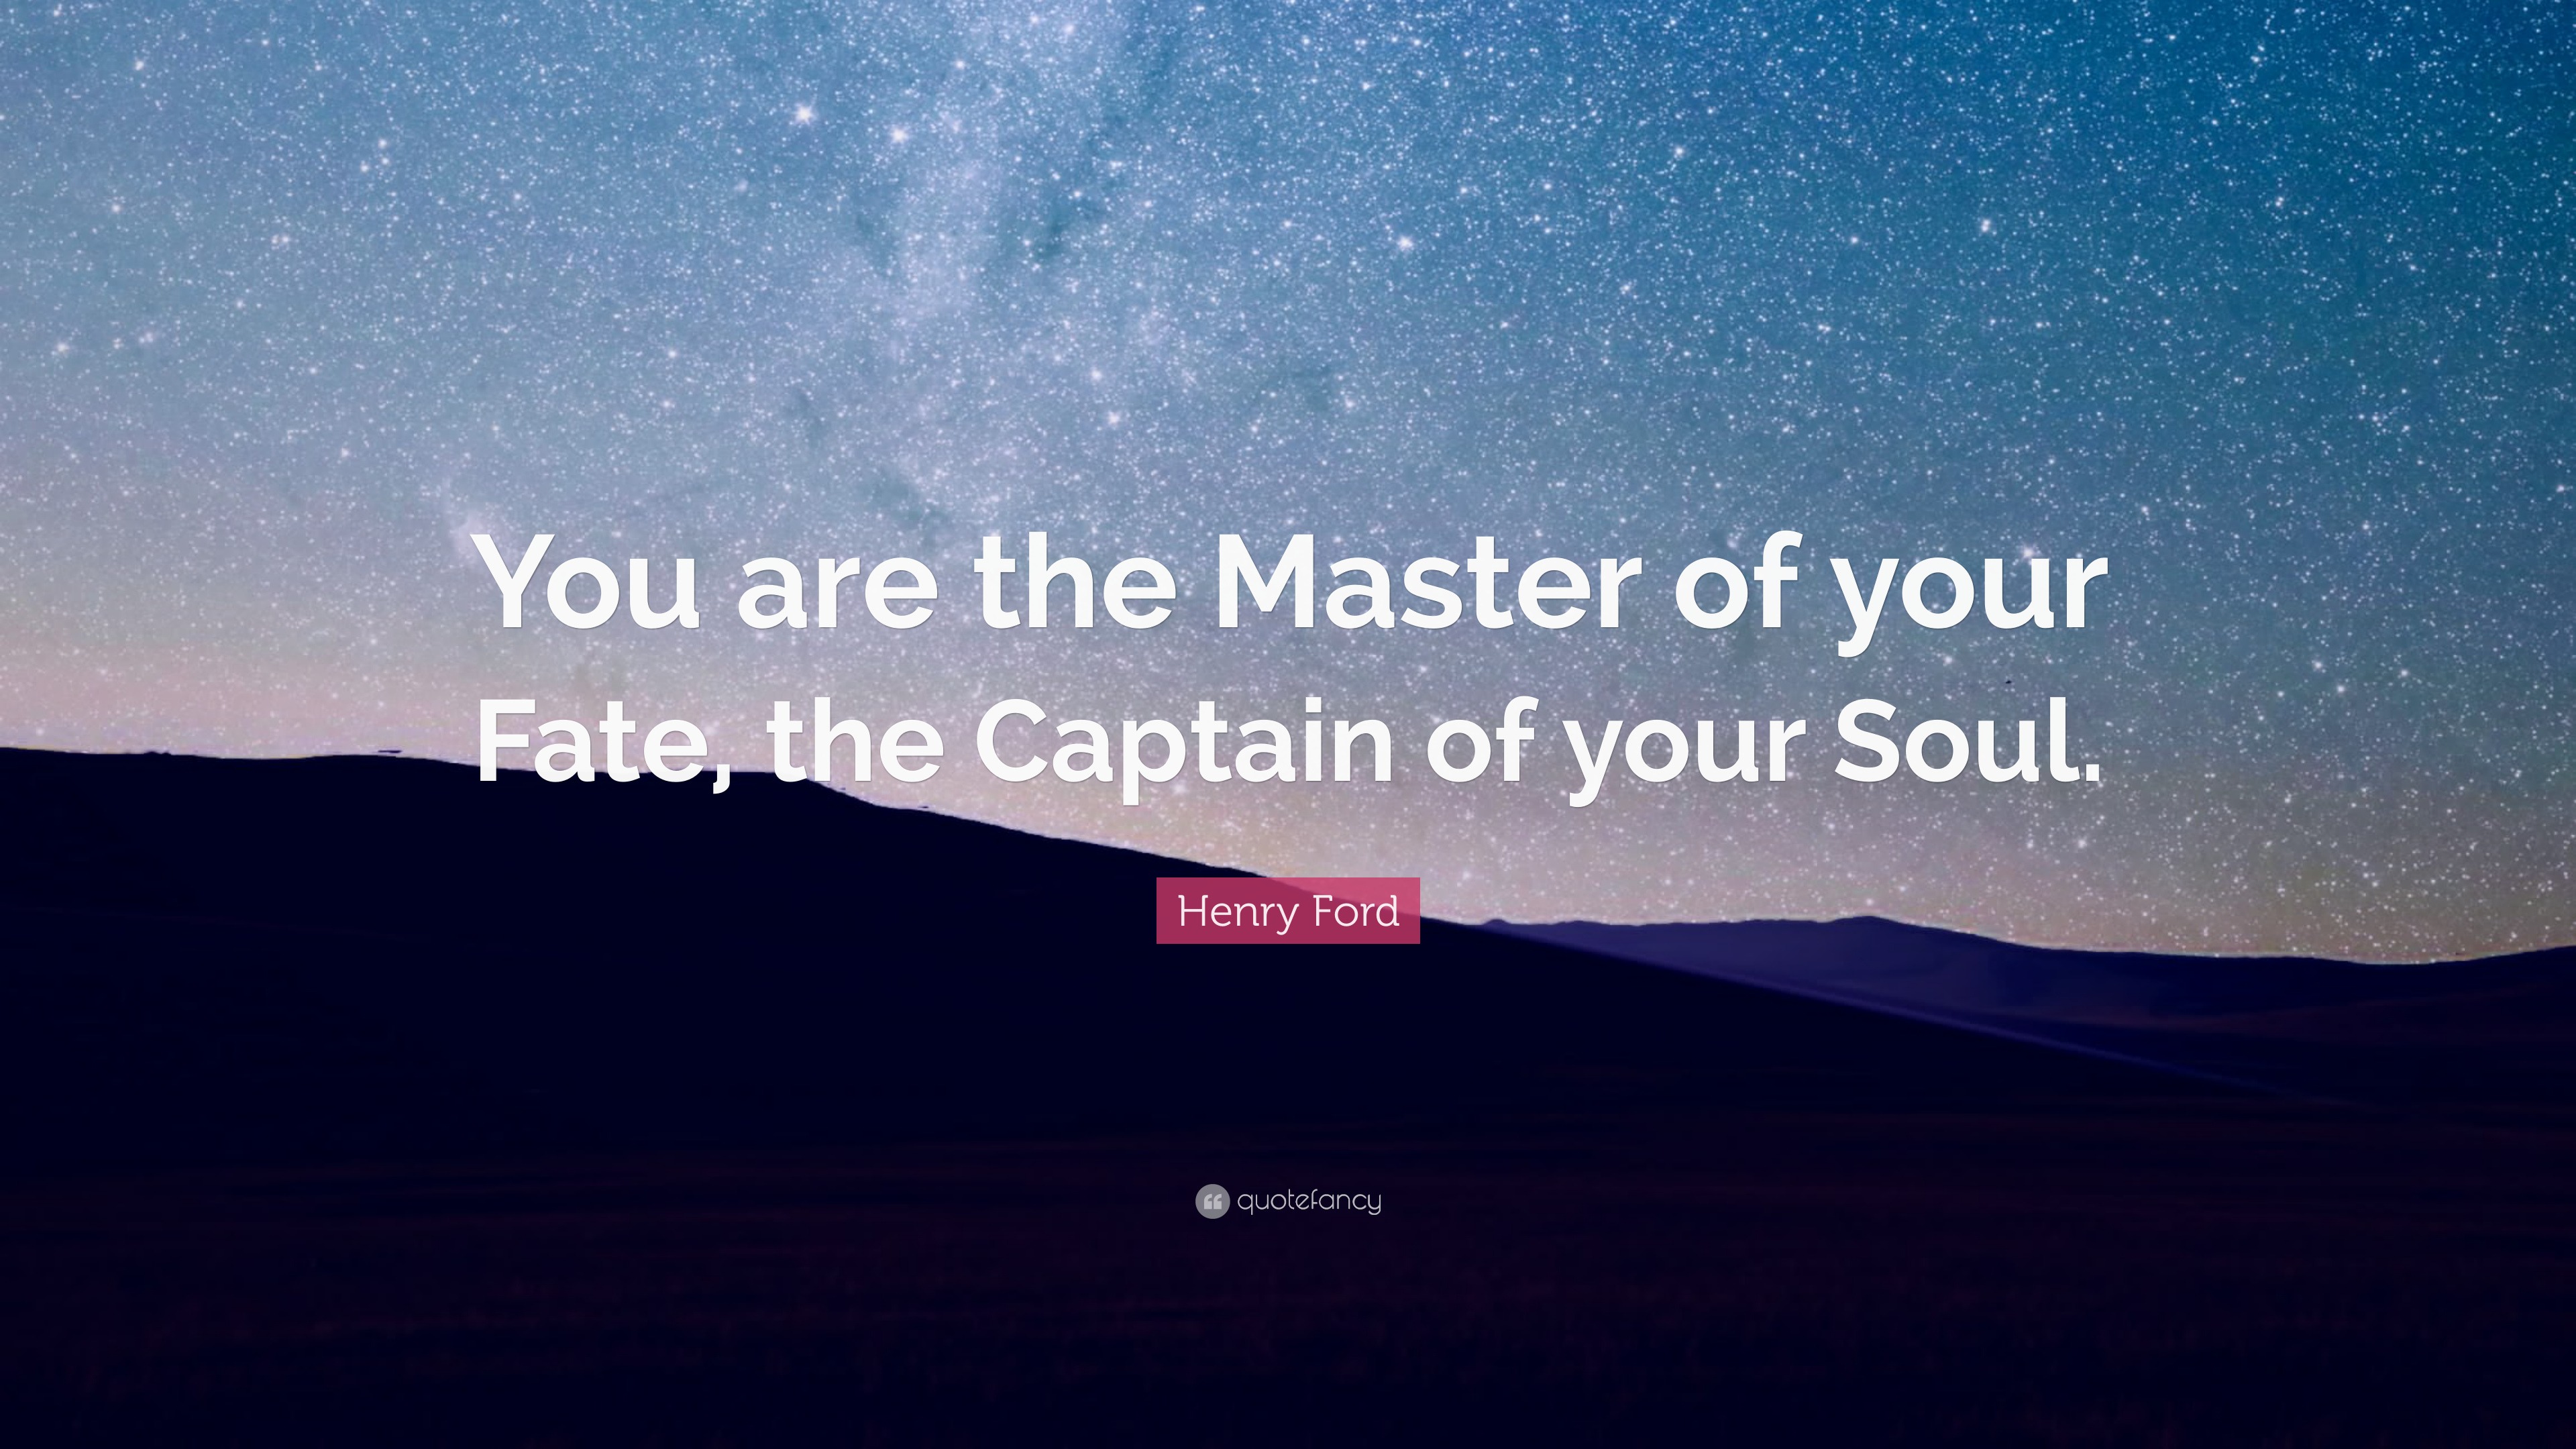 https://quotefancy.com/media/wallpaper/3840x2160/2065581-Henry-Ford-Quote-You-are-the-Master-of-your-Fate-the-Captain-of.jpg